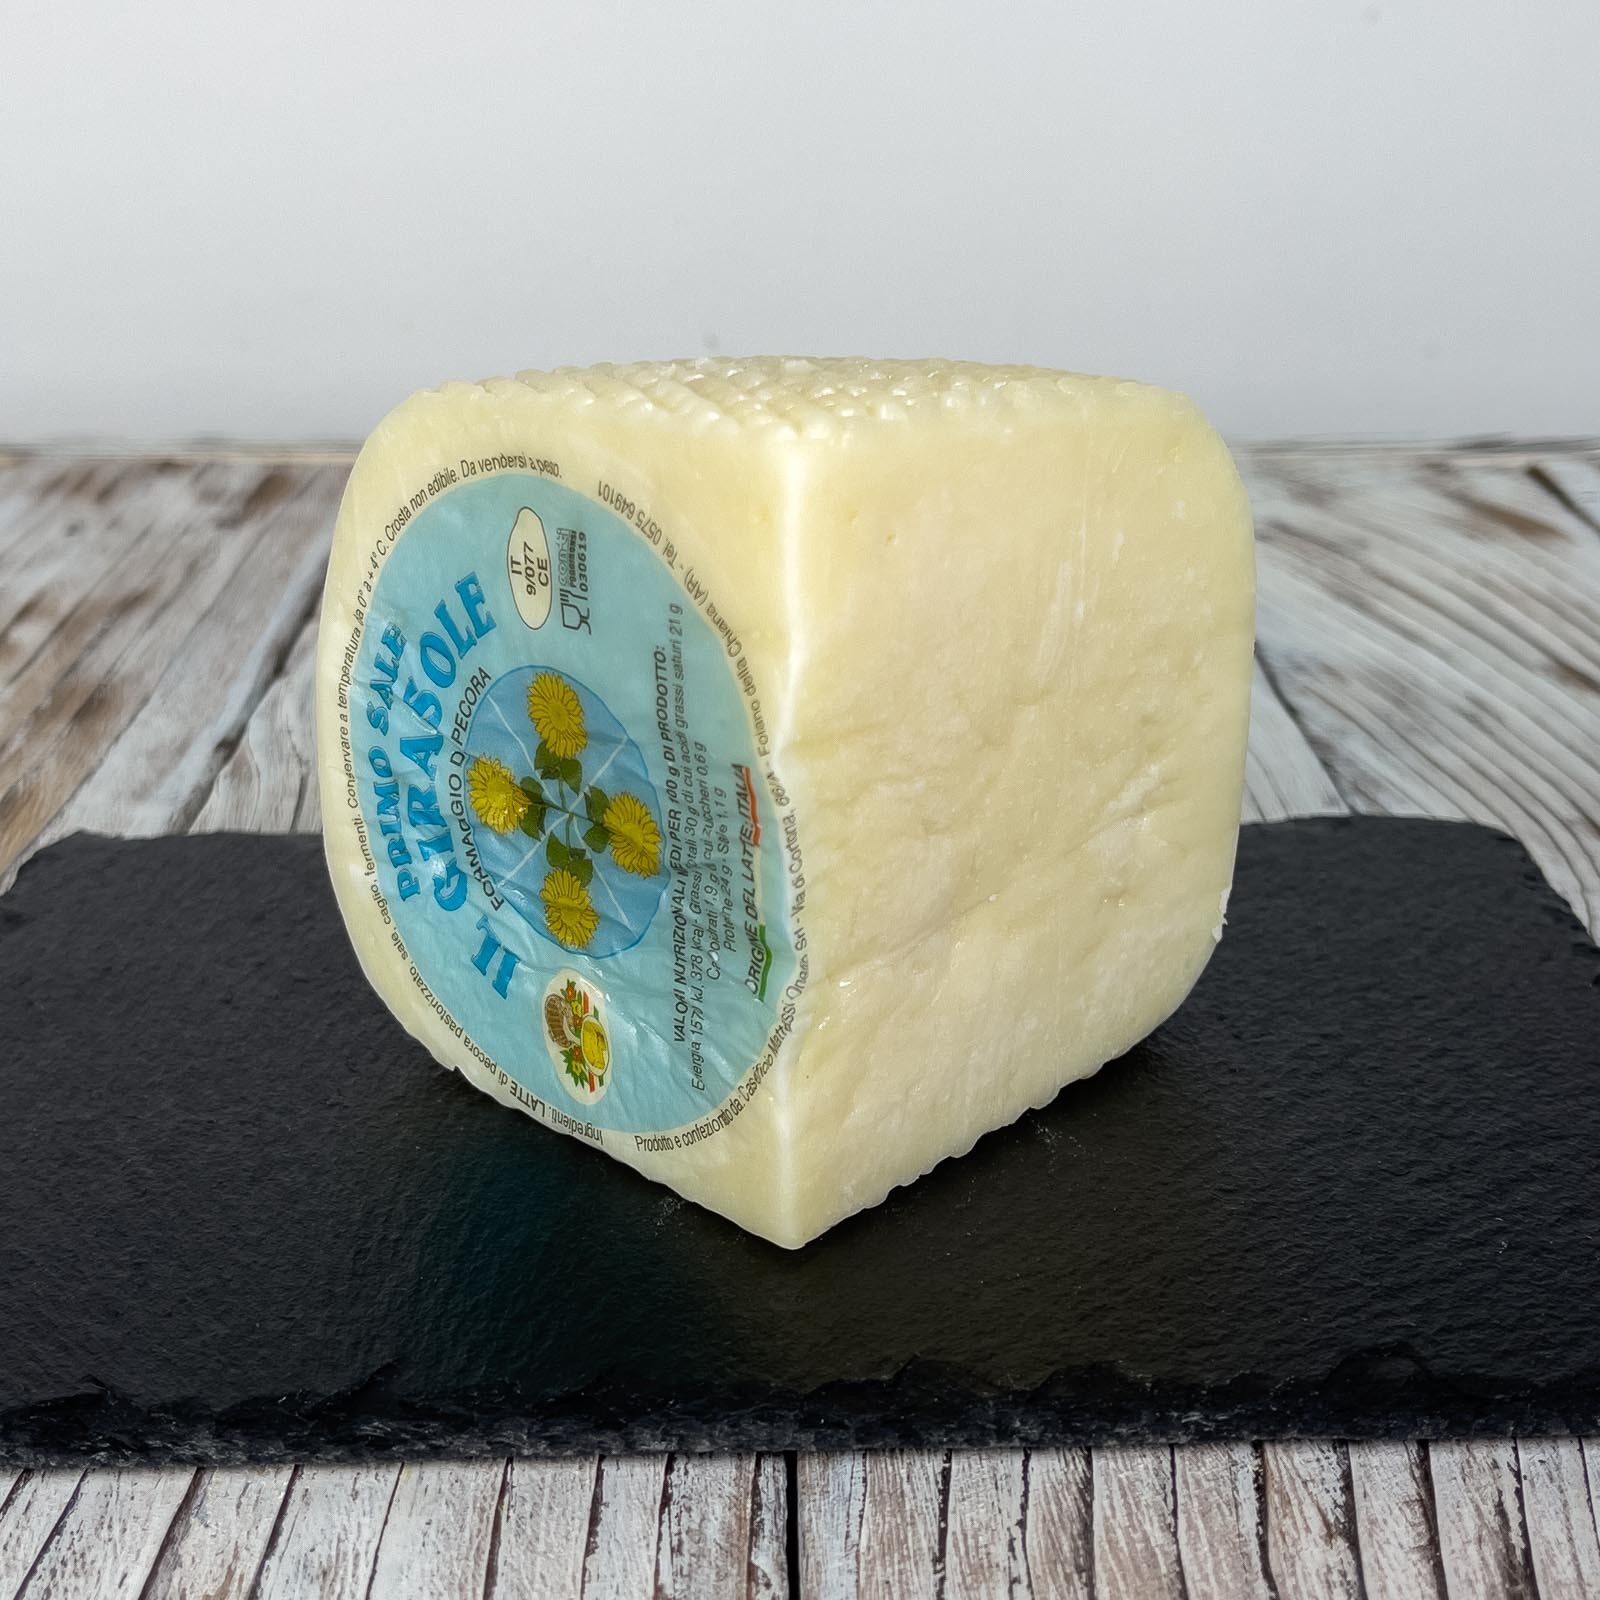 “Primo Sale” Slightly Aged Pecorino Cheese is a typical Tuscan soft cheese, obtained from first choice whole sheep's milk, subjected to a short maturing process and vacuum packed. It is characterized by a sweet and light flavor, as well as a very fresh and delicate scent.